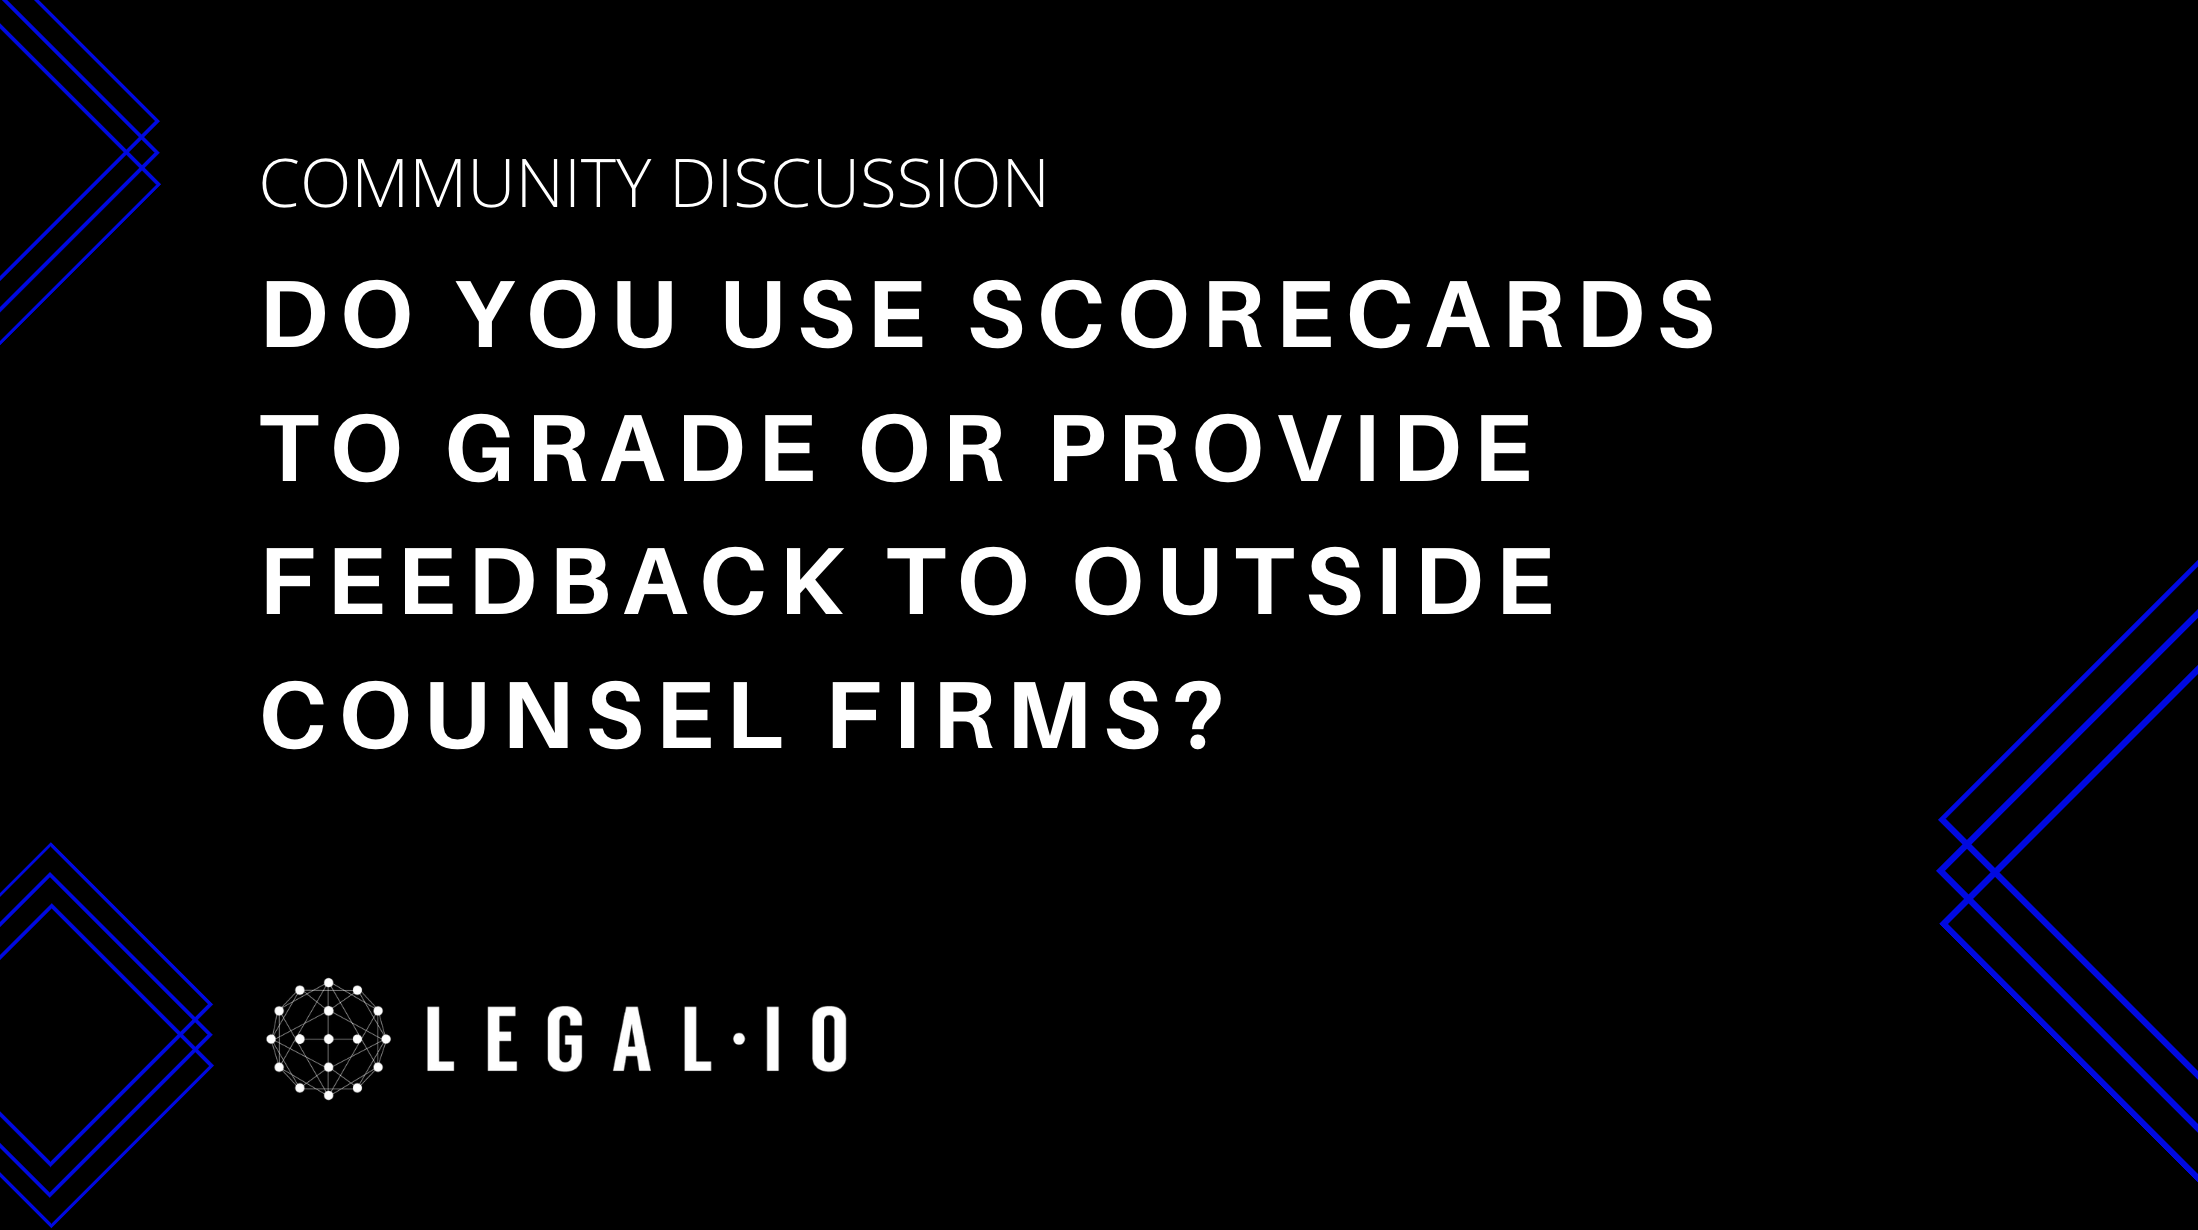 Community Discussion: Do you use scorecards to grade or provide feedback to outside counsel firms?